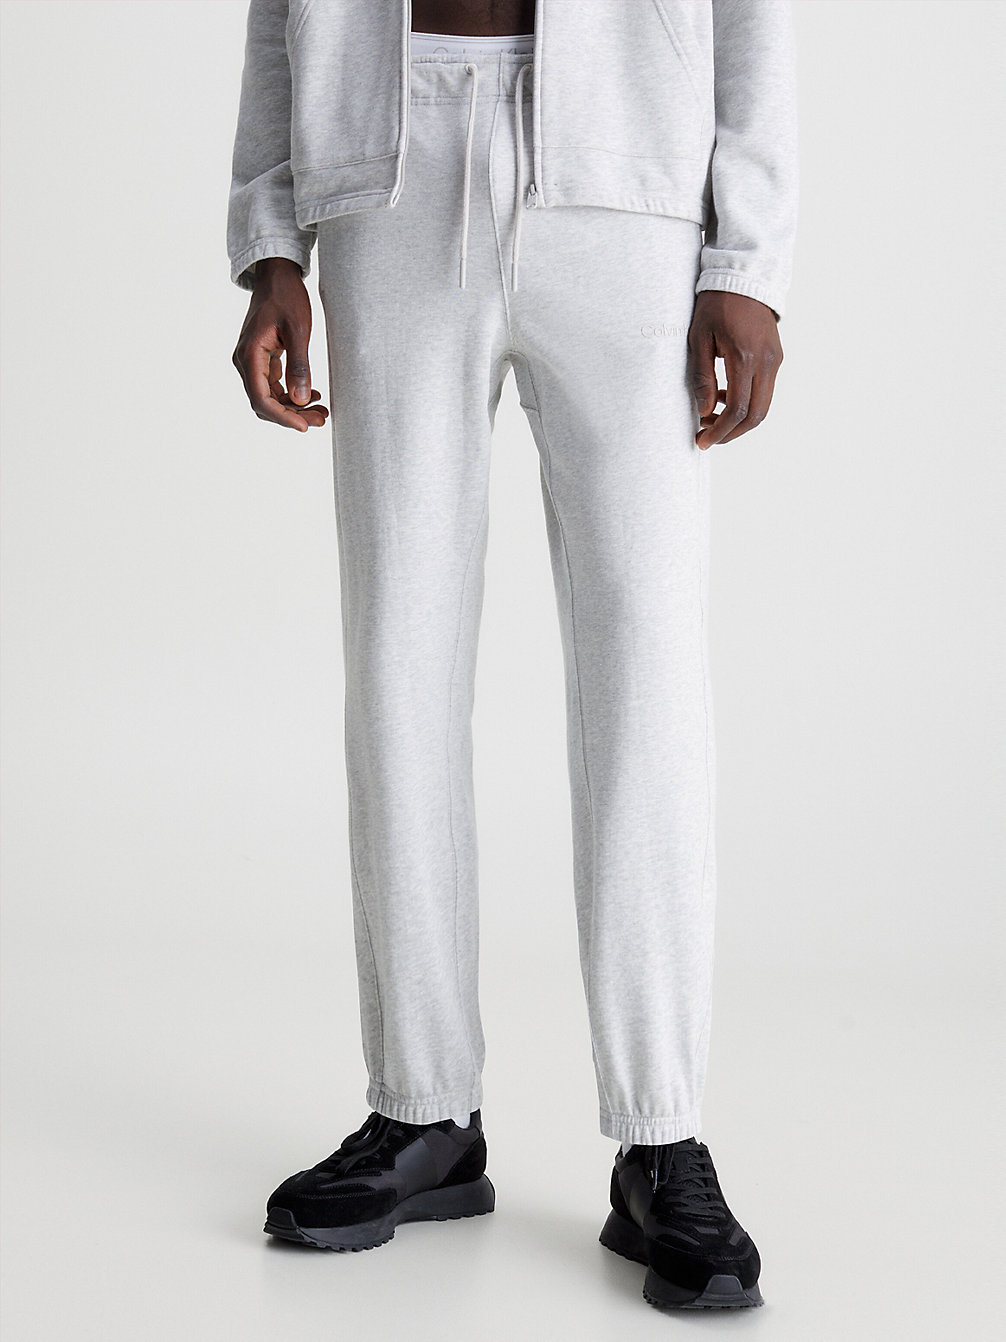 ATHLETIC GREY HEATHER Cotton Terry Joggers undefined men Calvin Klein